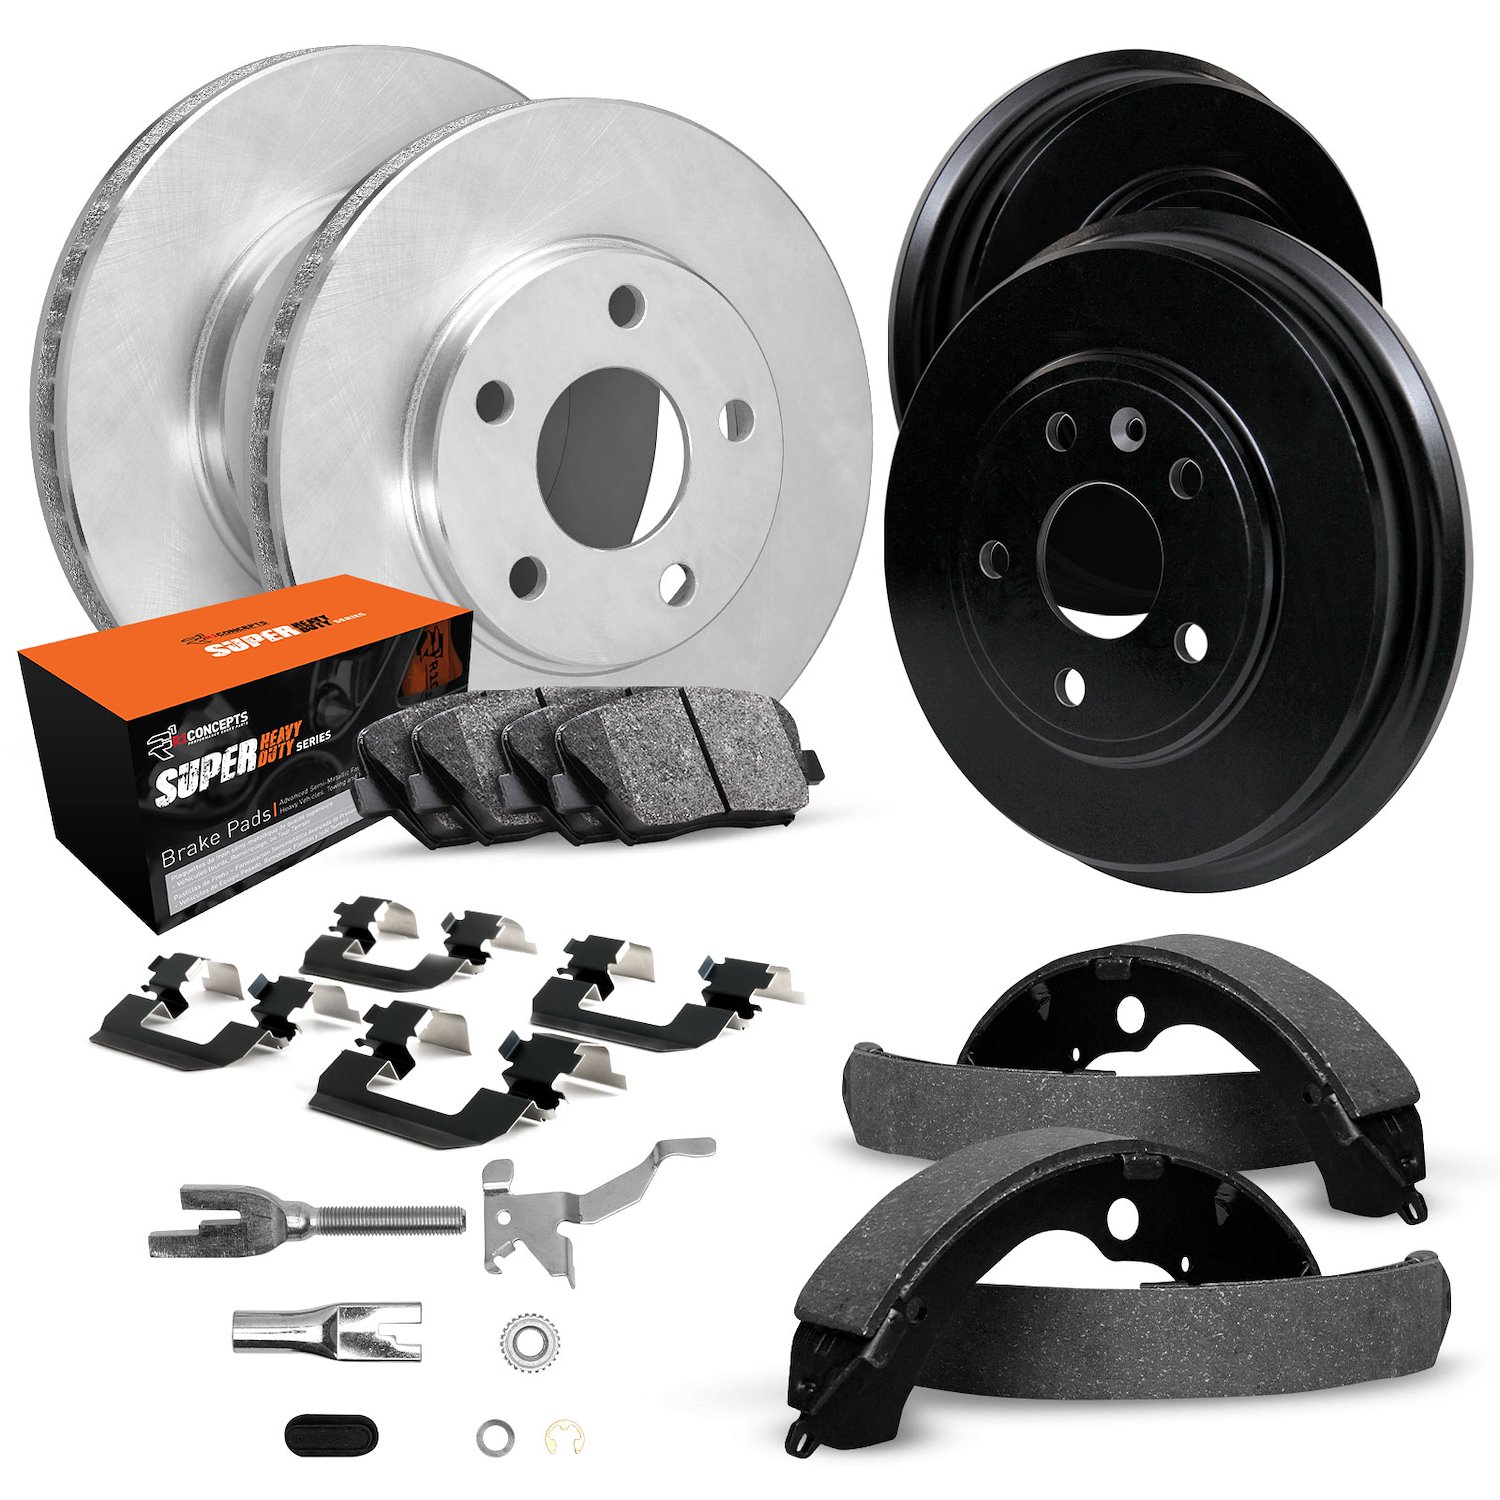 E-Line Blank Brake Rotor & Drum Set w/Super-Duty Pads, Shoes, Hardware, & Adjusters, 1975-1975 GM, Position: Front & Rear